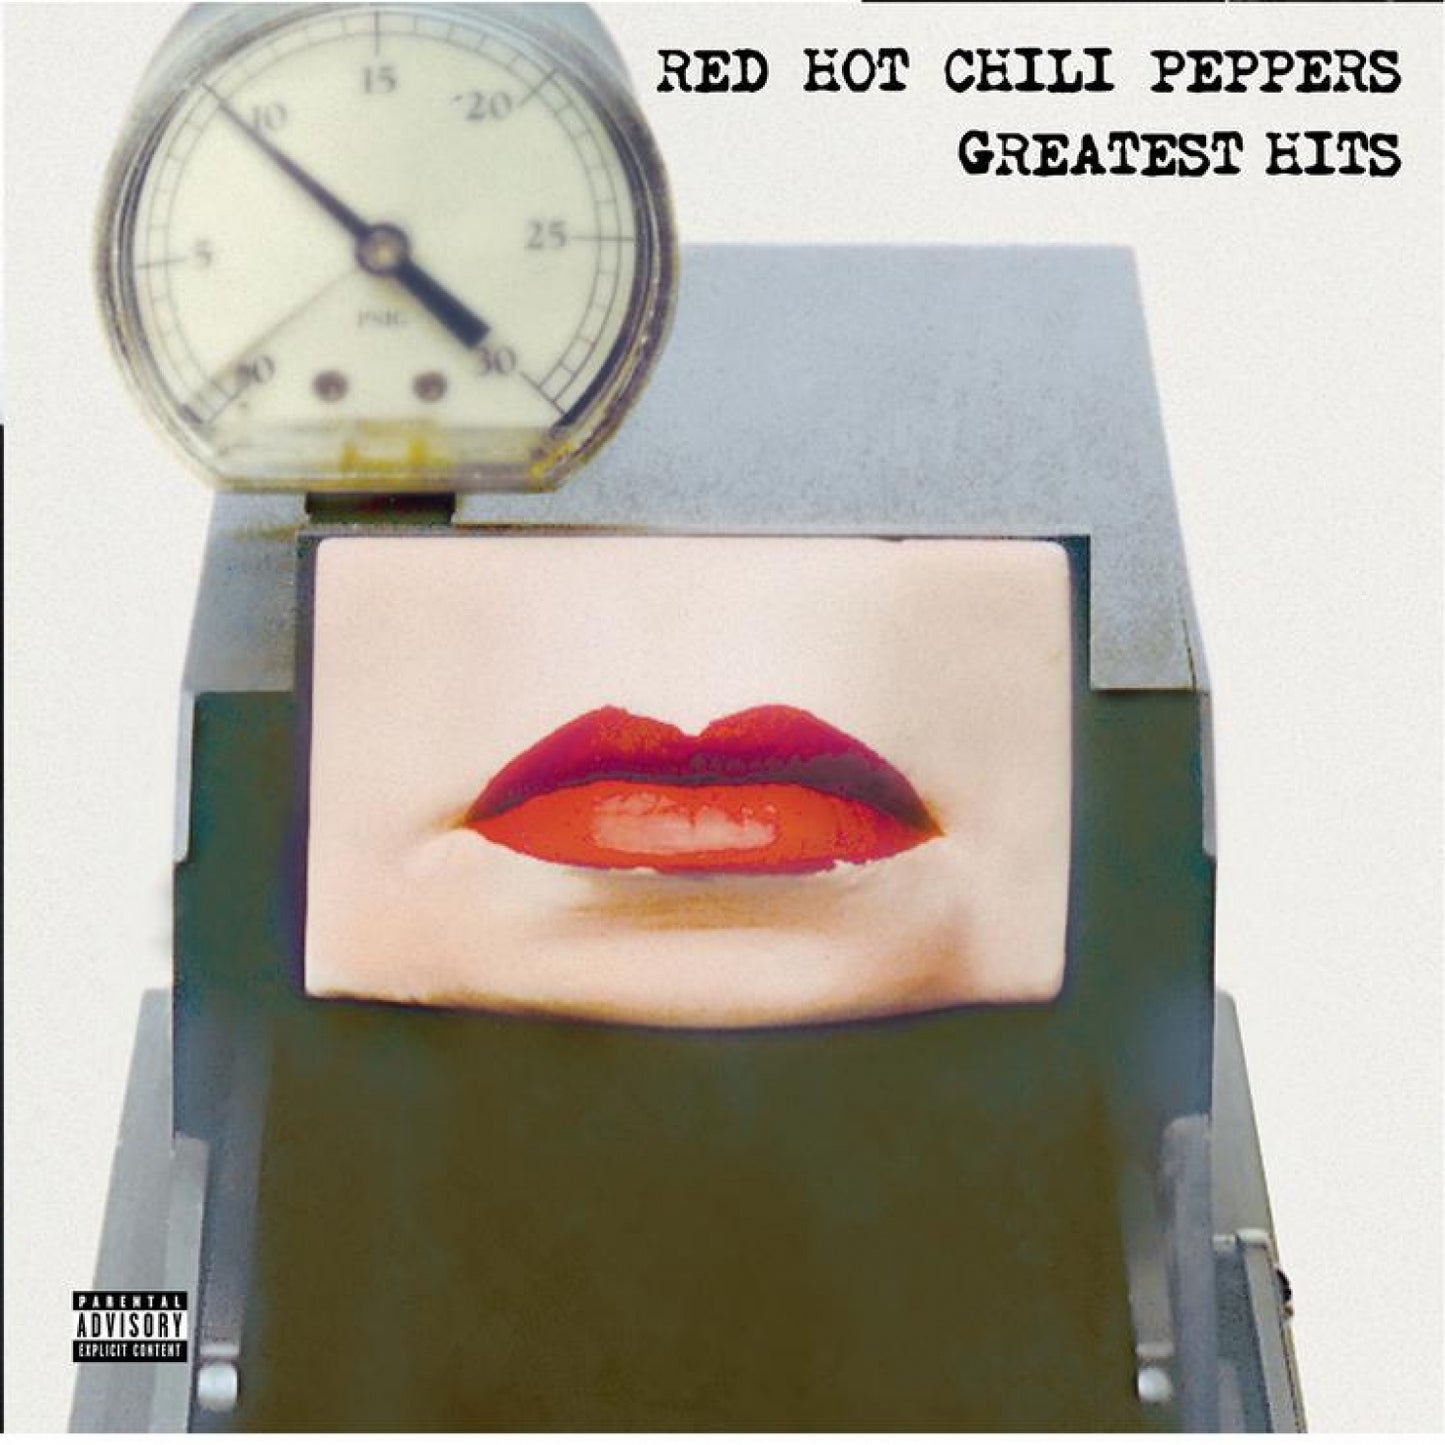 Red Hot Chili Peppers - Greatest Hits (Vinyl)